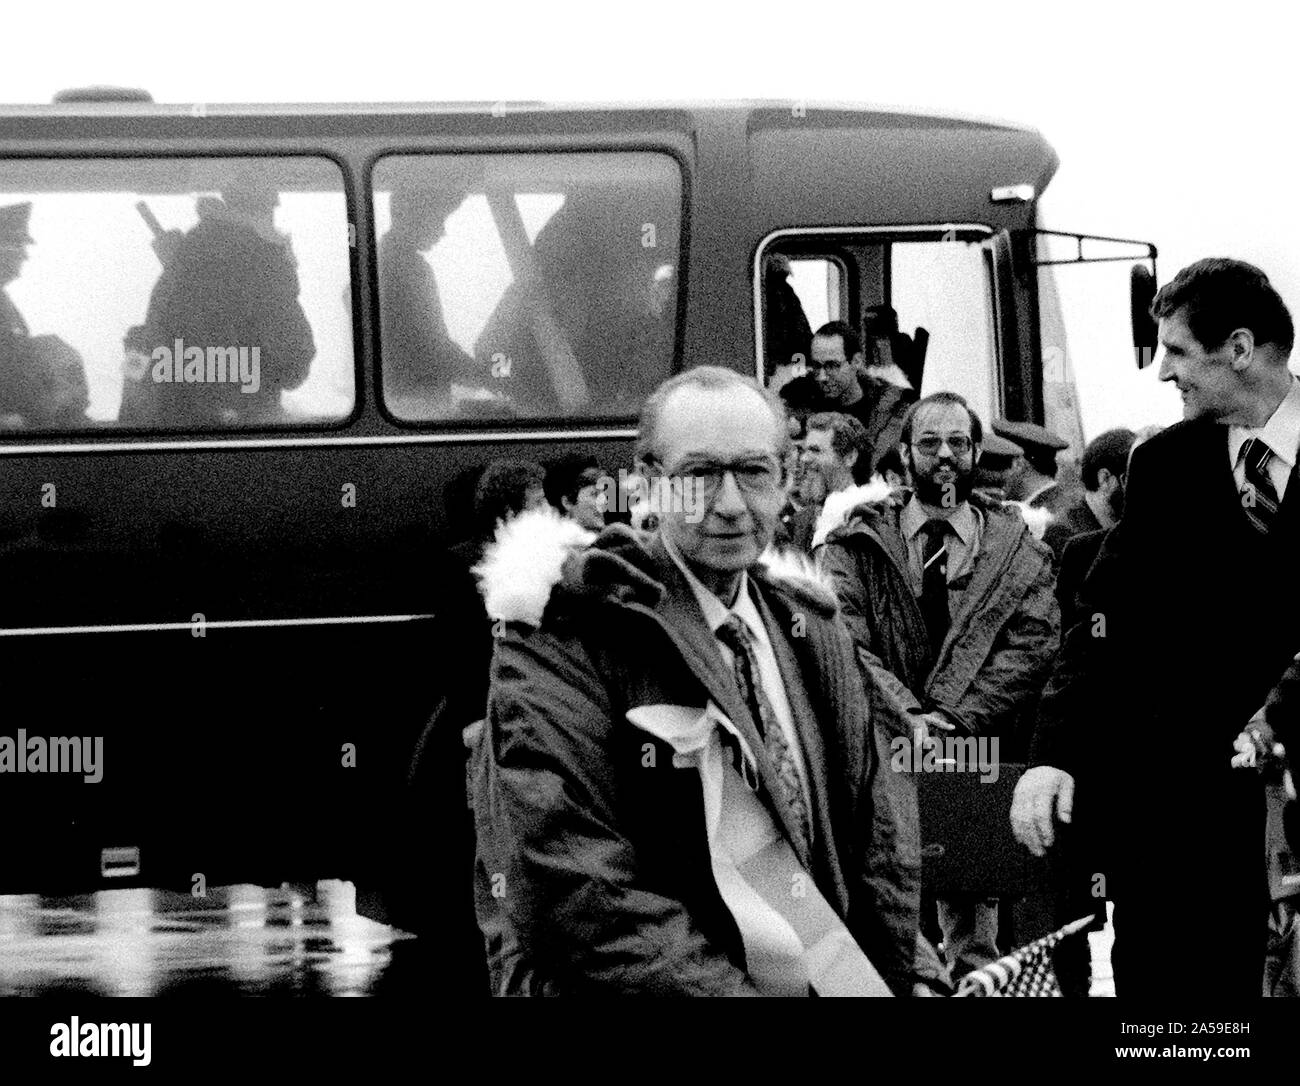 1981 - Former hostages Robert C. Ode and Donald Cooke, left to right, wearing winter coats, arrive at the base for their departure to the United States.  The 52 hostages were hospitalized for a few days after their release from Iran. Stock Photo